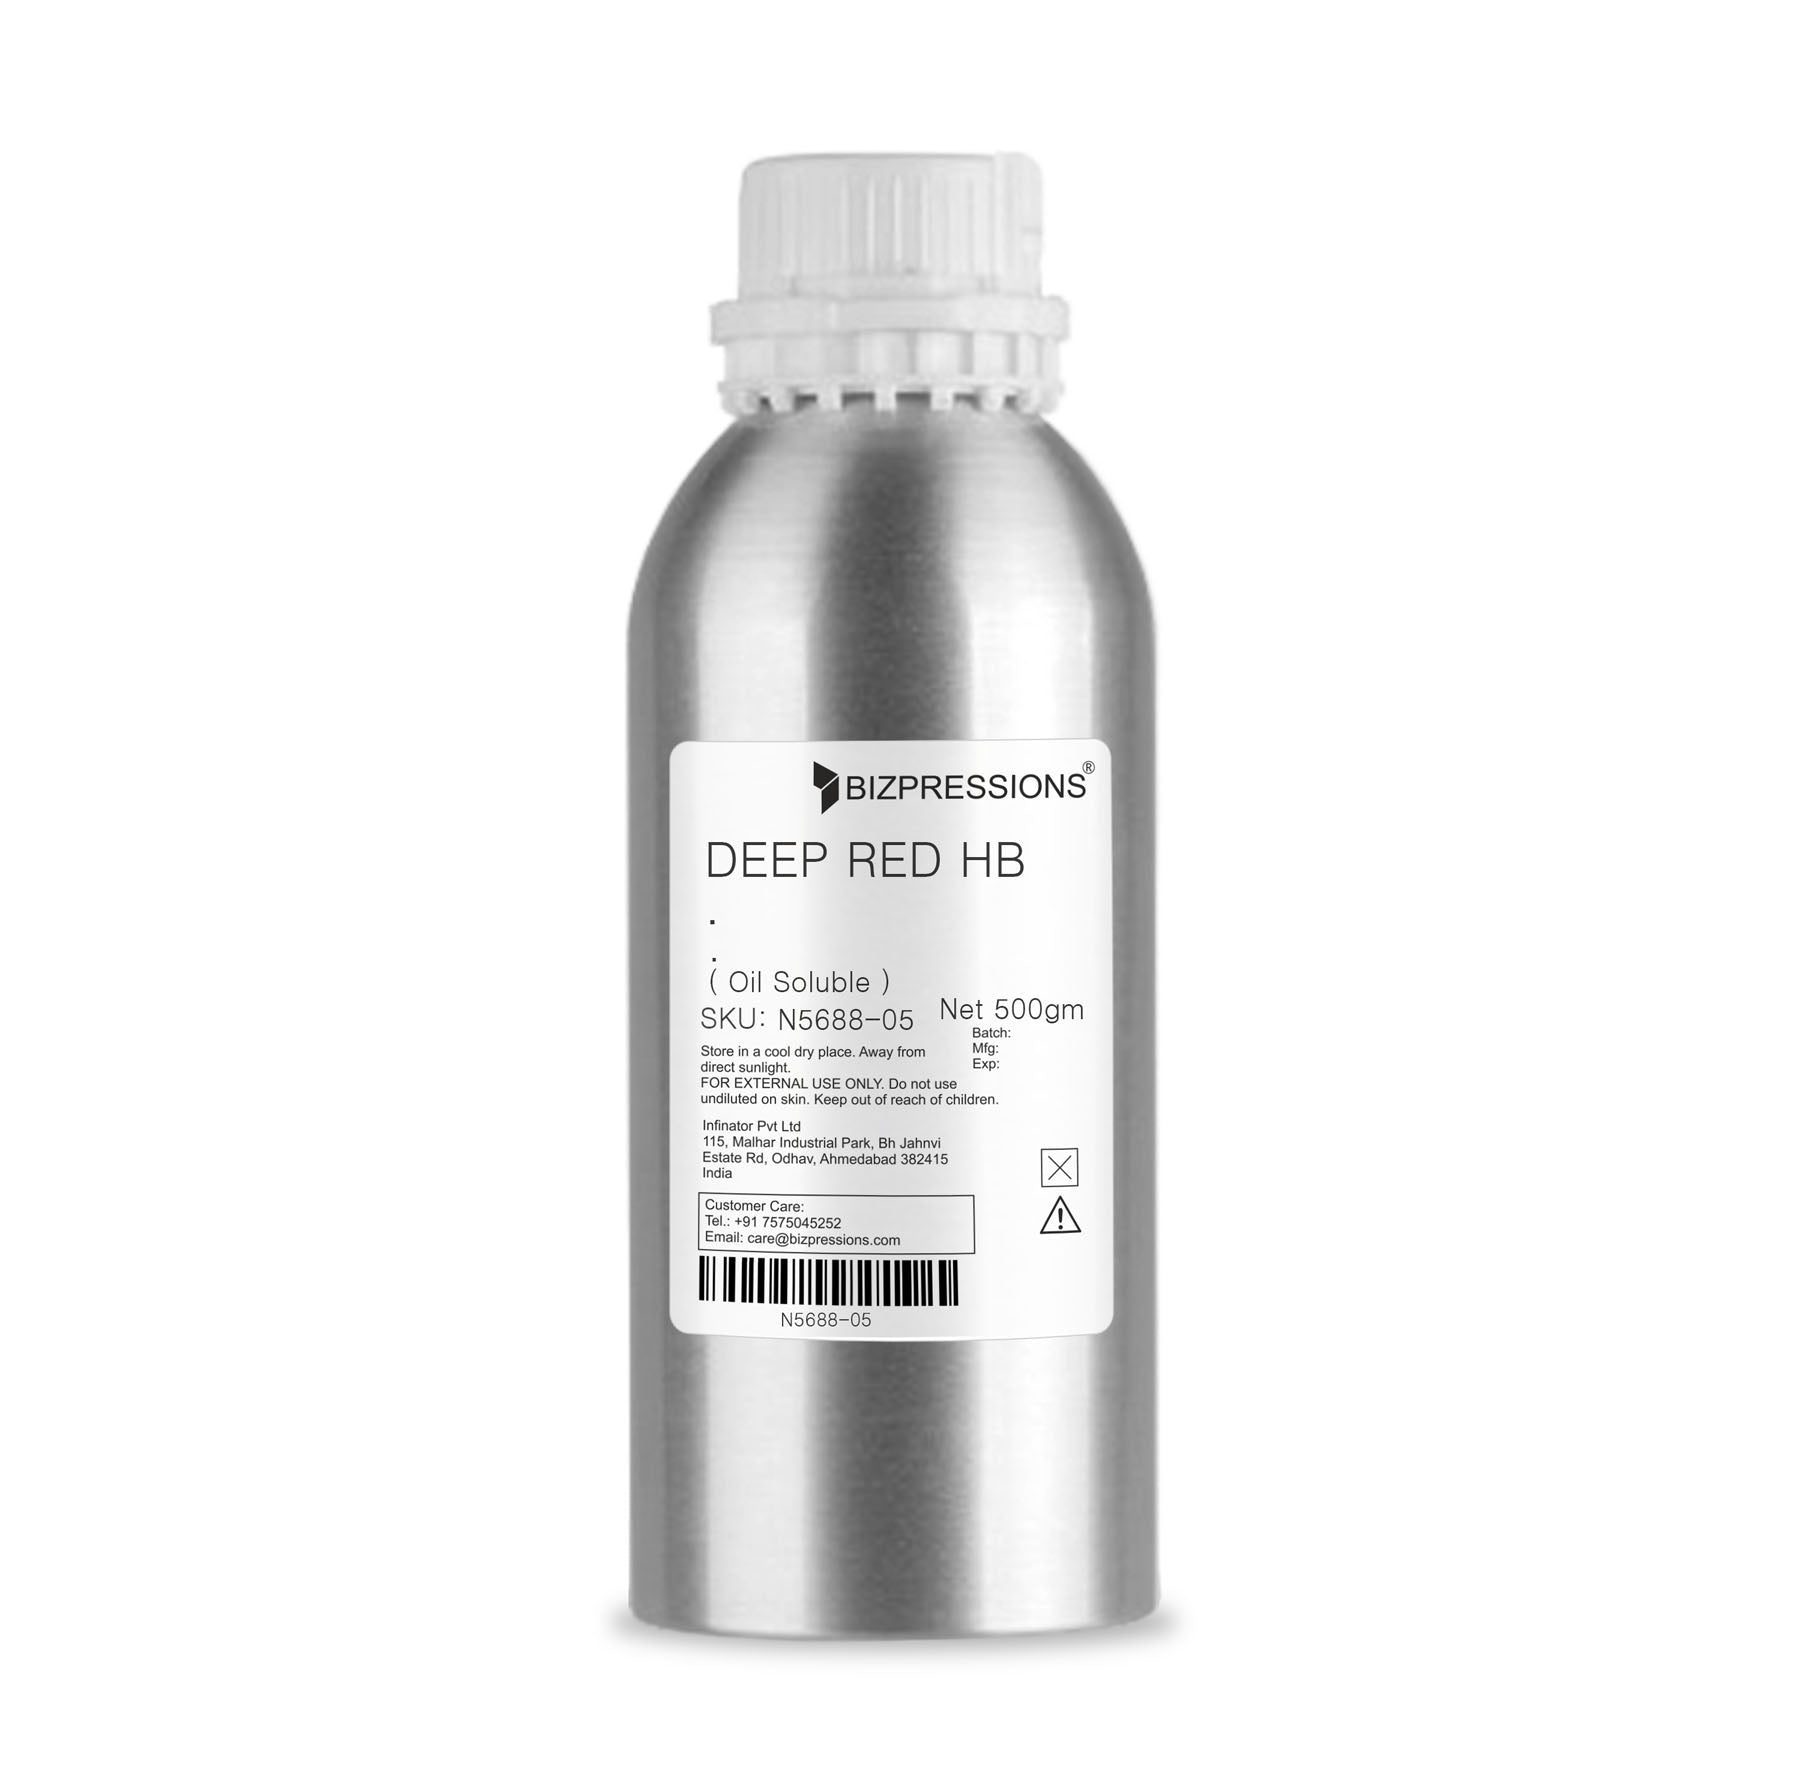 DEEP RED HB - Fragrance ( Oil Soluble ) - 500 gm